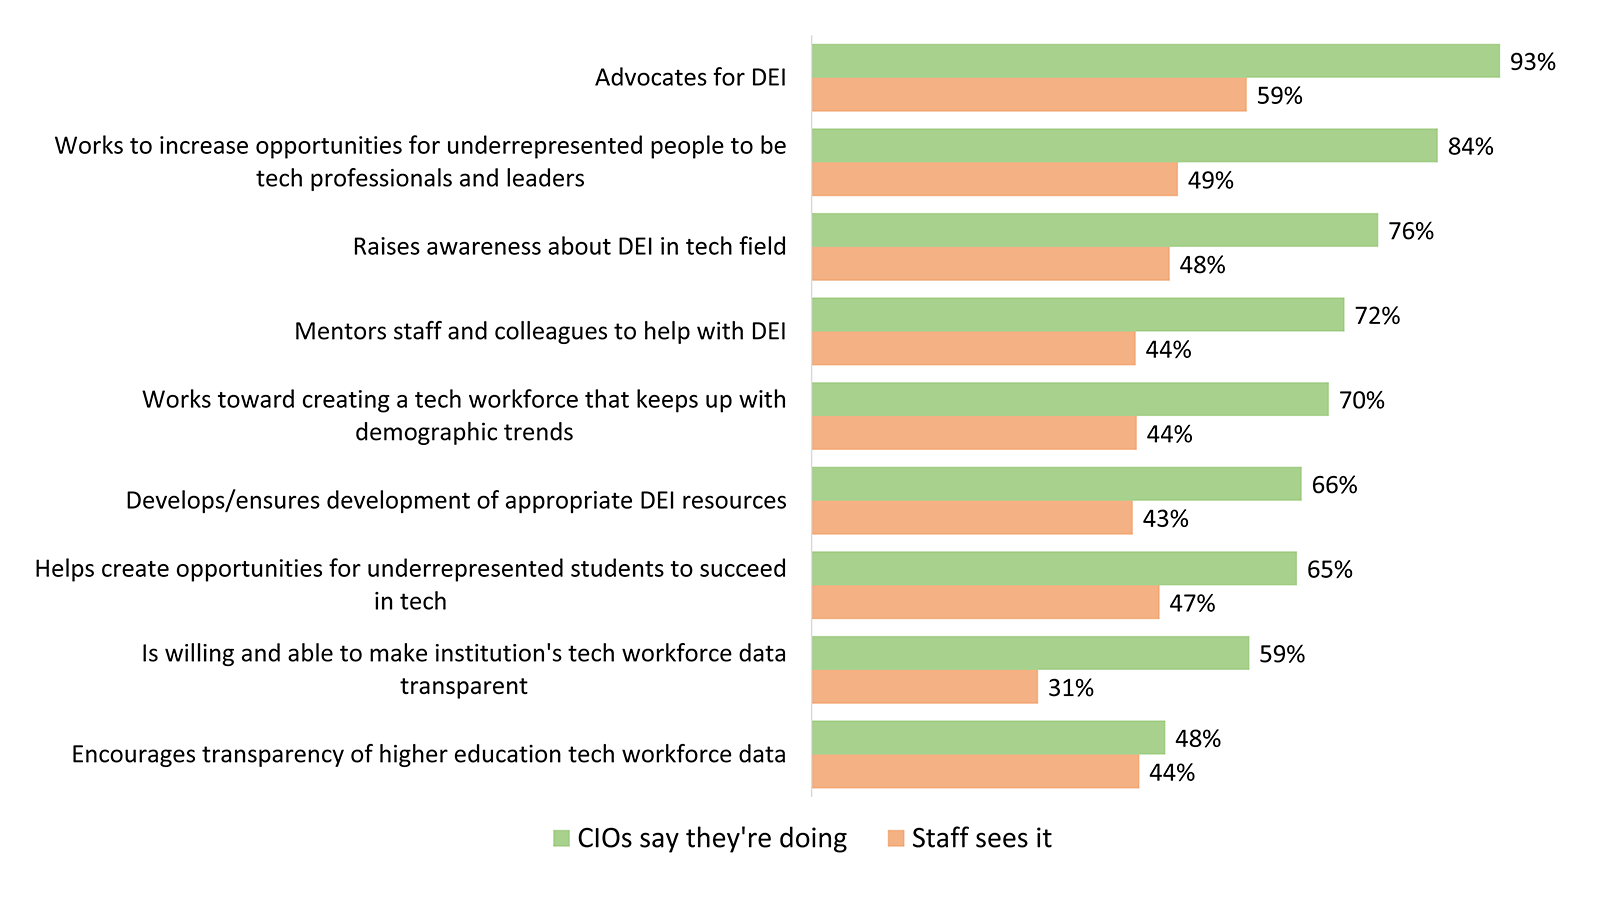 Bar graph showing the percentage of respondents who said for each item that the CIO says they're doing it (CIO) and the Staff sees them doing it (Staff).
Advocates for DEI: CIO 93%, Staff 59%.
Works to create opportunities for underrepresented people to be tech professionals and leaders: CIO 84%, Staff 49%.
Raises awareness about DEI in tech field: CIO 76%, Staff 48%.
Mentors staff and colleagues to help with DEI: CIO 72%, Staff 44%.
Works toward creating a tech workforce that keeps up with demographic trends: CIO 70%, Staff 44%.
Develops/ensures development of appropriate DEI resources: CIO 66%, Staff 43%.
Helps create opportunities for underrepresented students to succeed in tech: CIO 65%, Staff 47%.
Is willing and able to make institution's tech workforce data transparent: CIO 59%, Staff 31%.
Encourages transparency of higher education tech workforce data: CIO 48%, Staff 44%. 